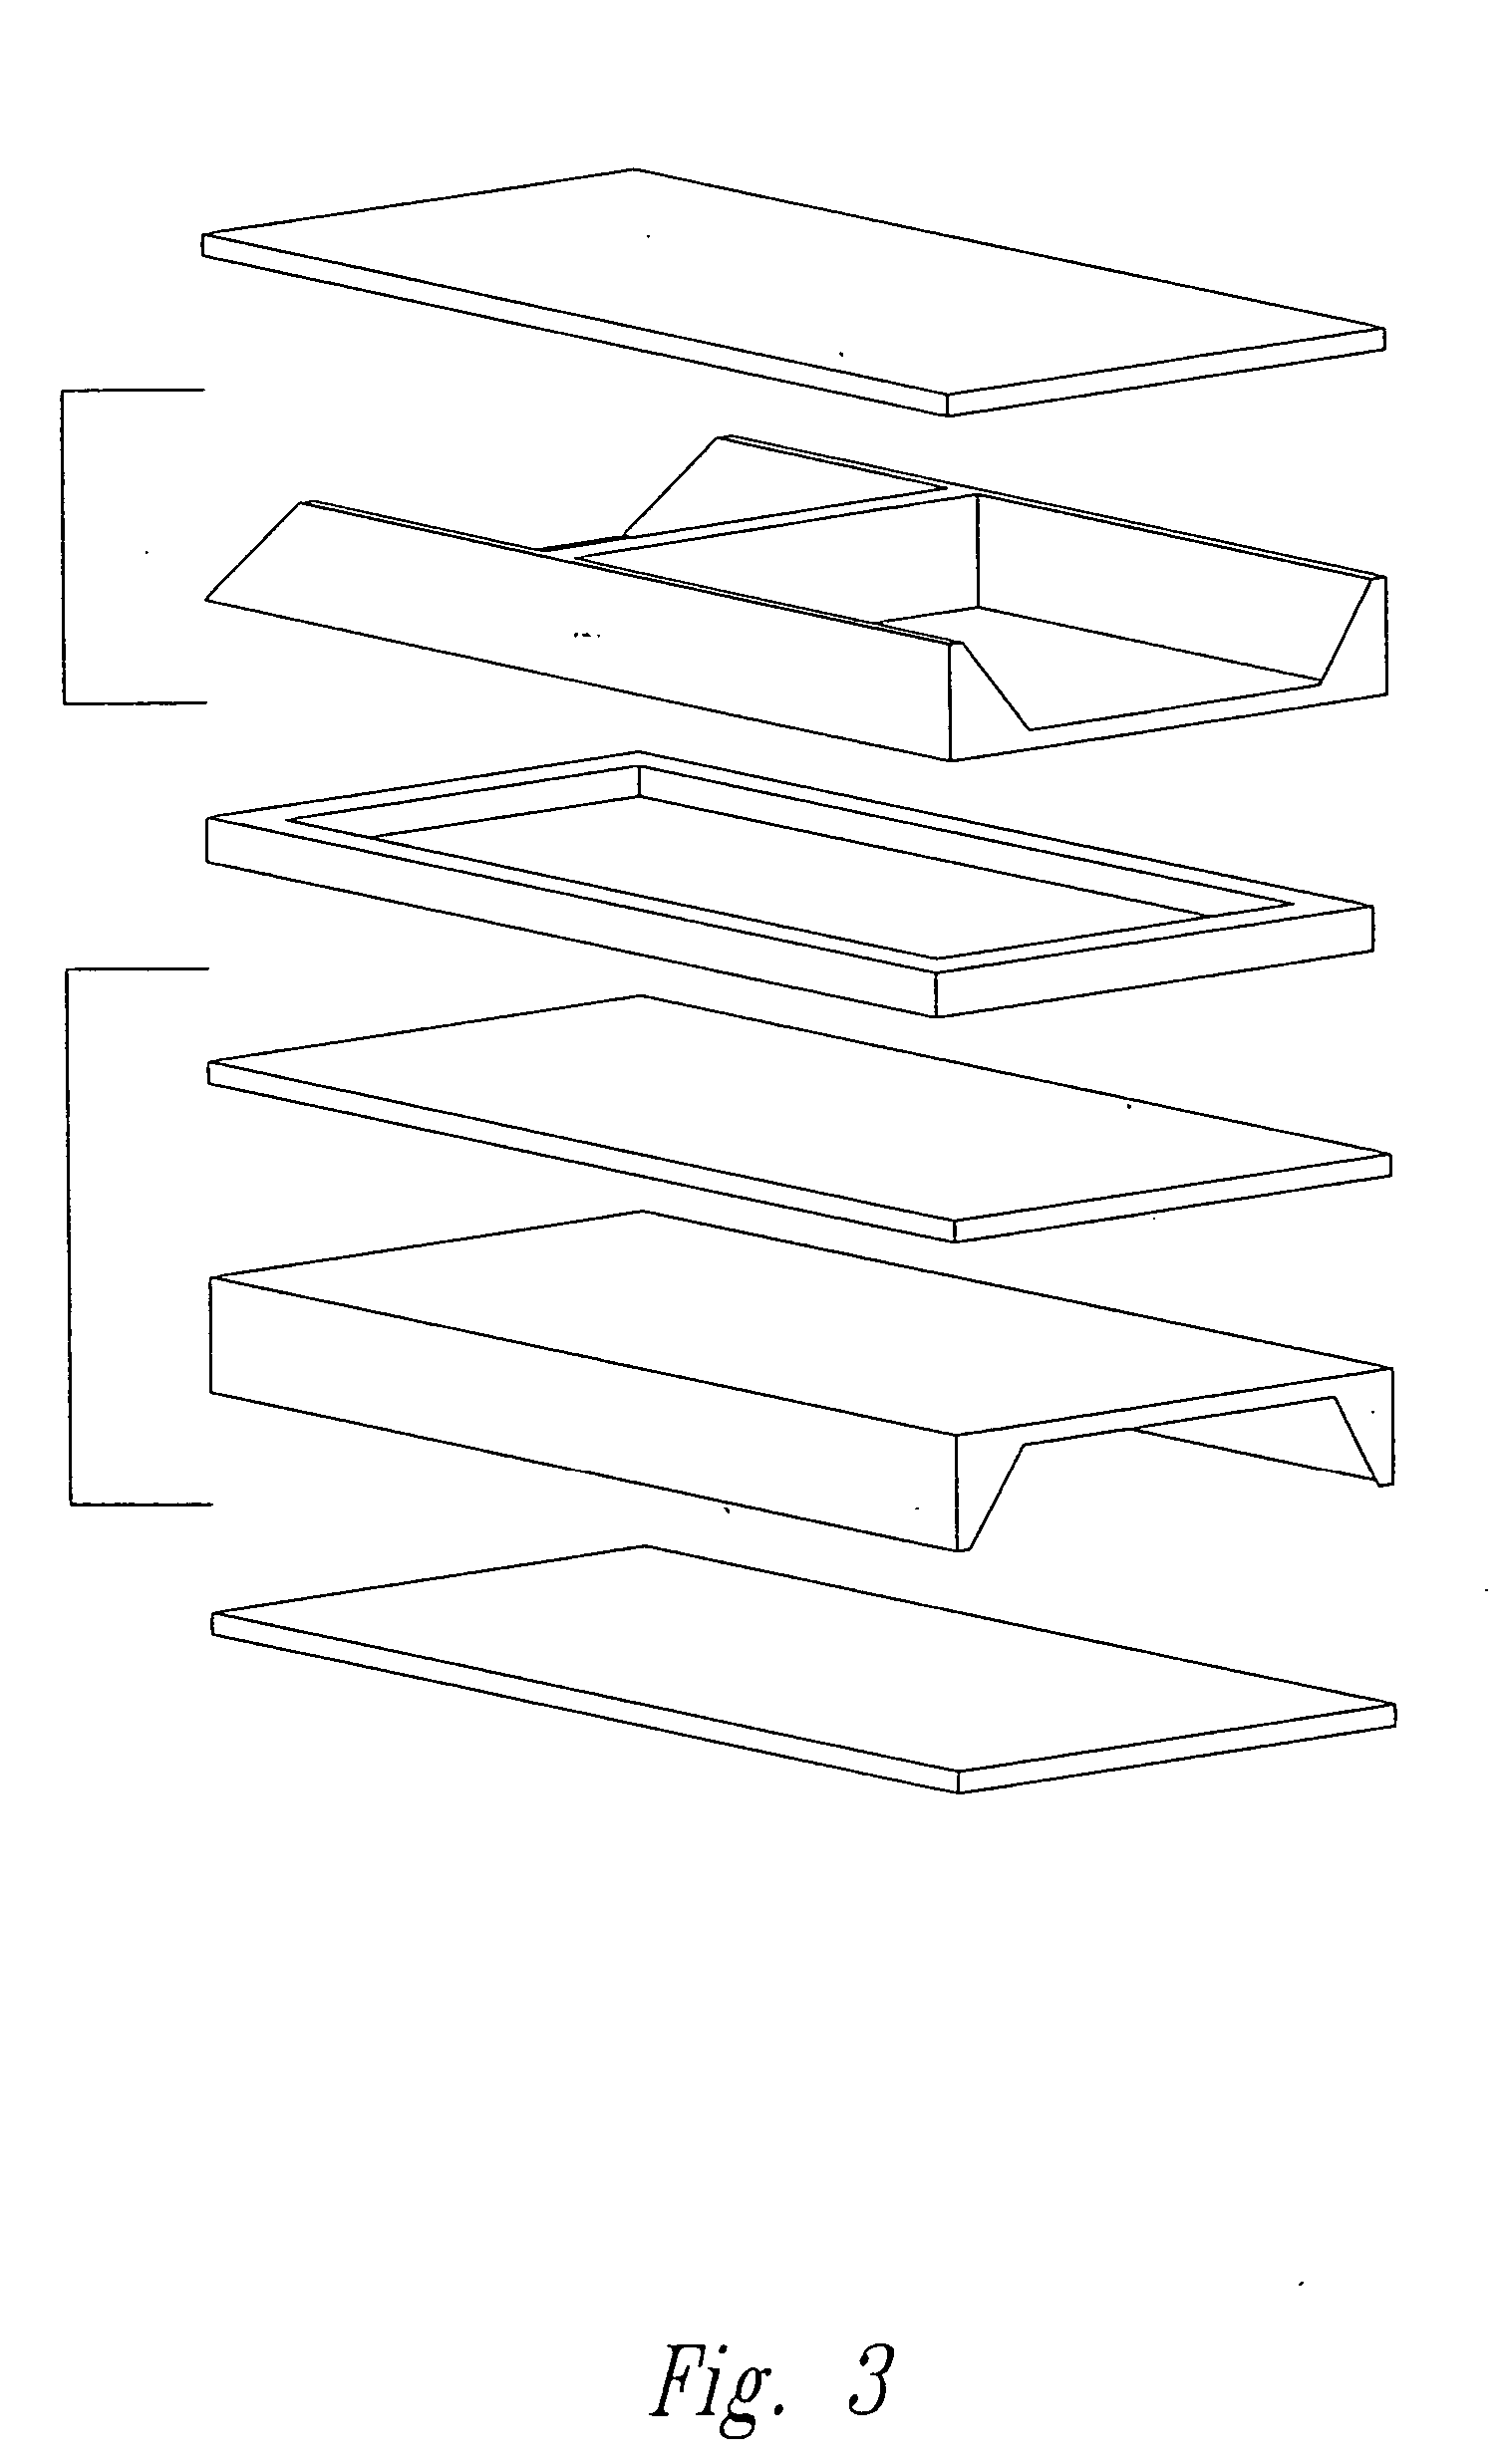 Fuel cells having silicon substrates and/or sol-gel derived support structures